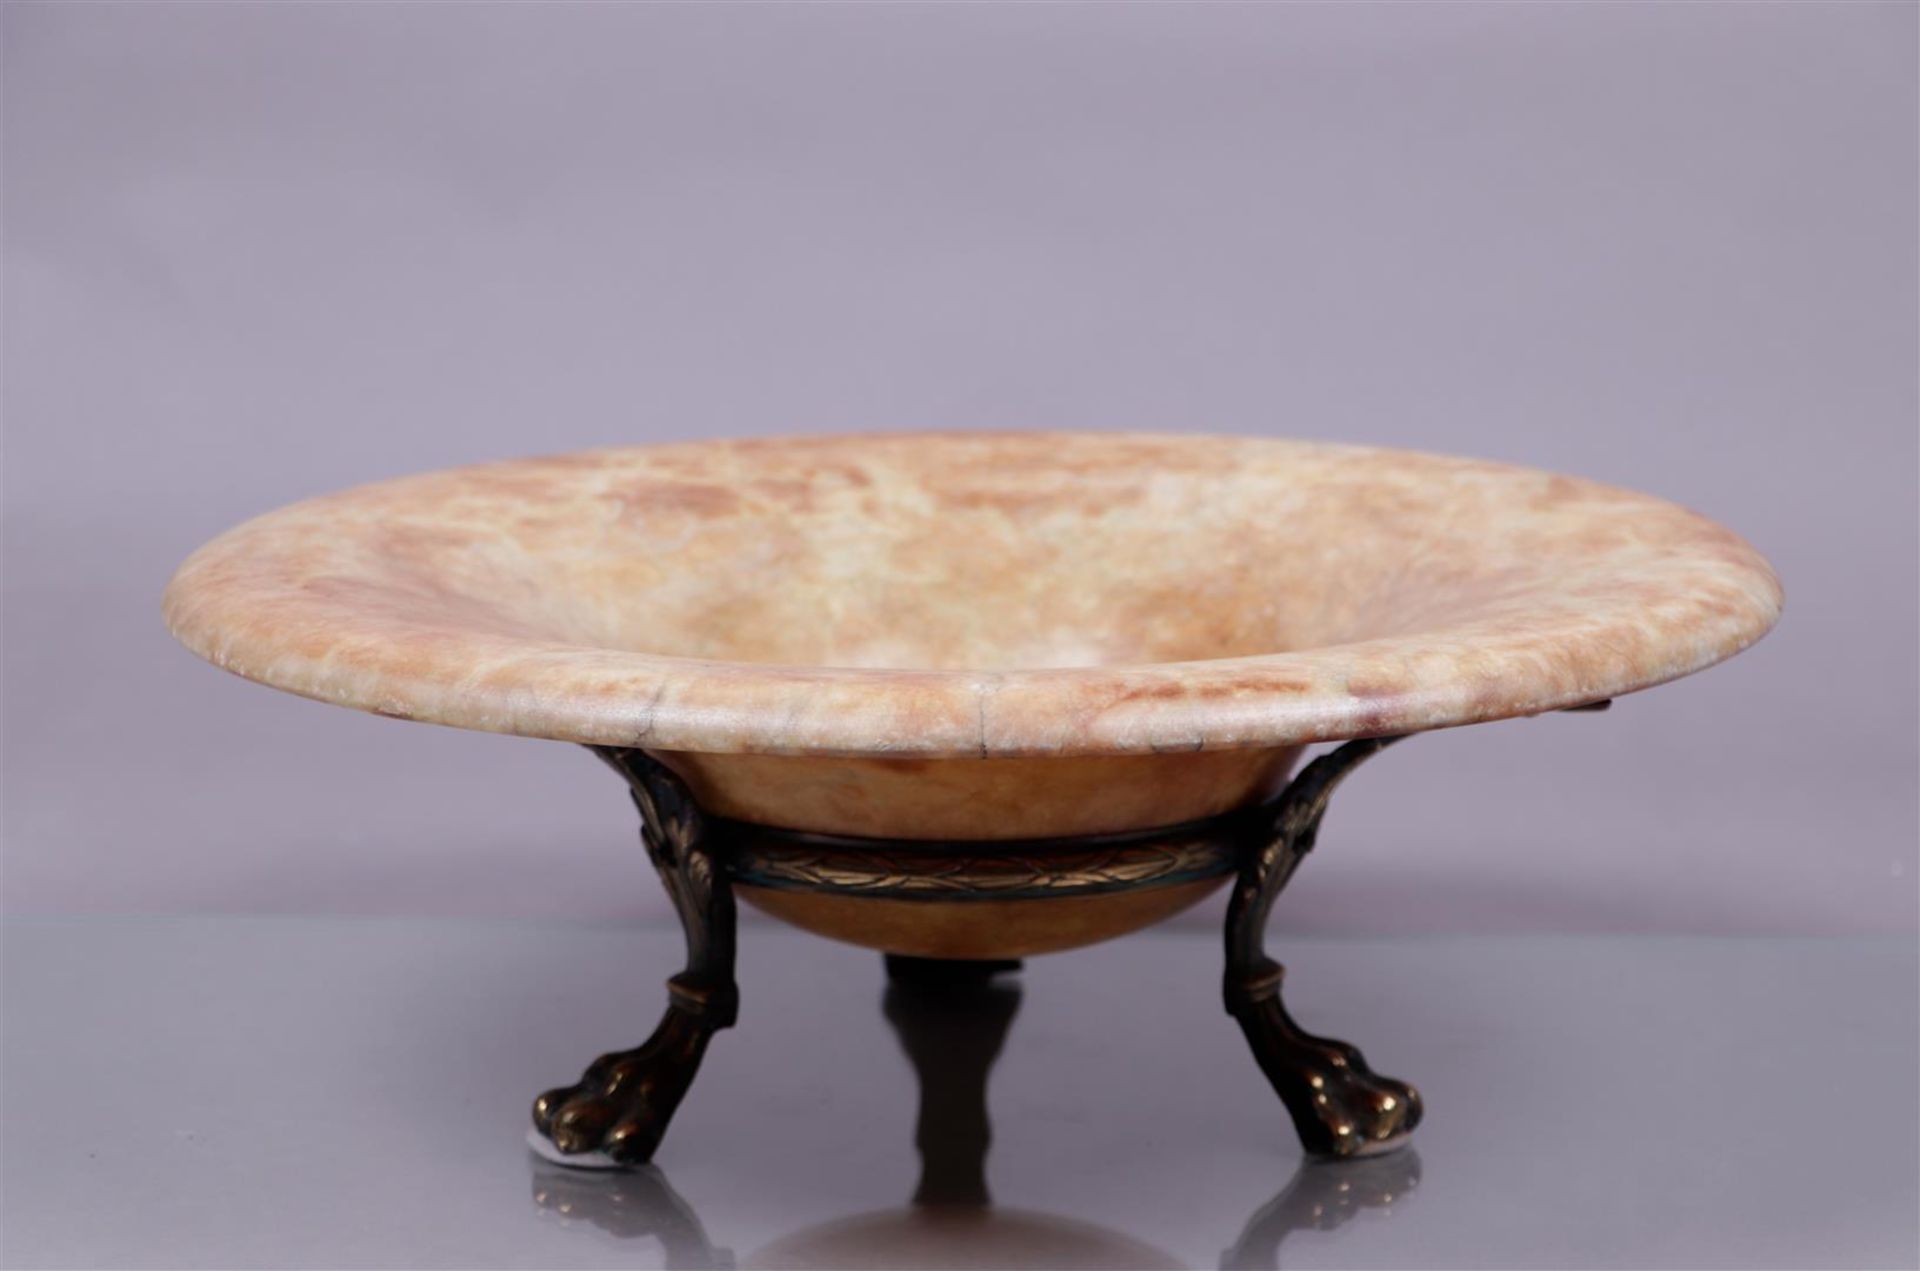 A Roman style marble bowl on a brass base. Italy.
Diam.: 42 cm.